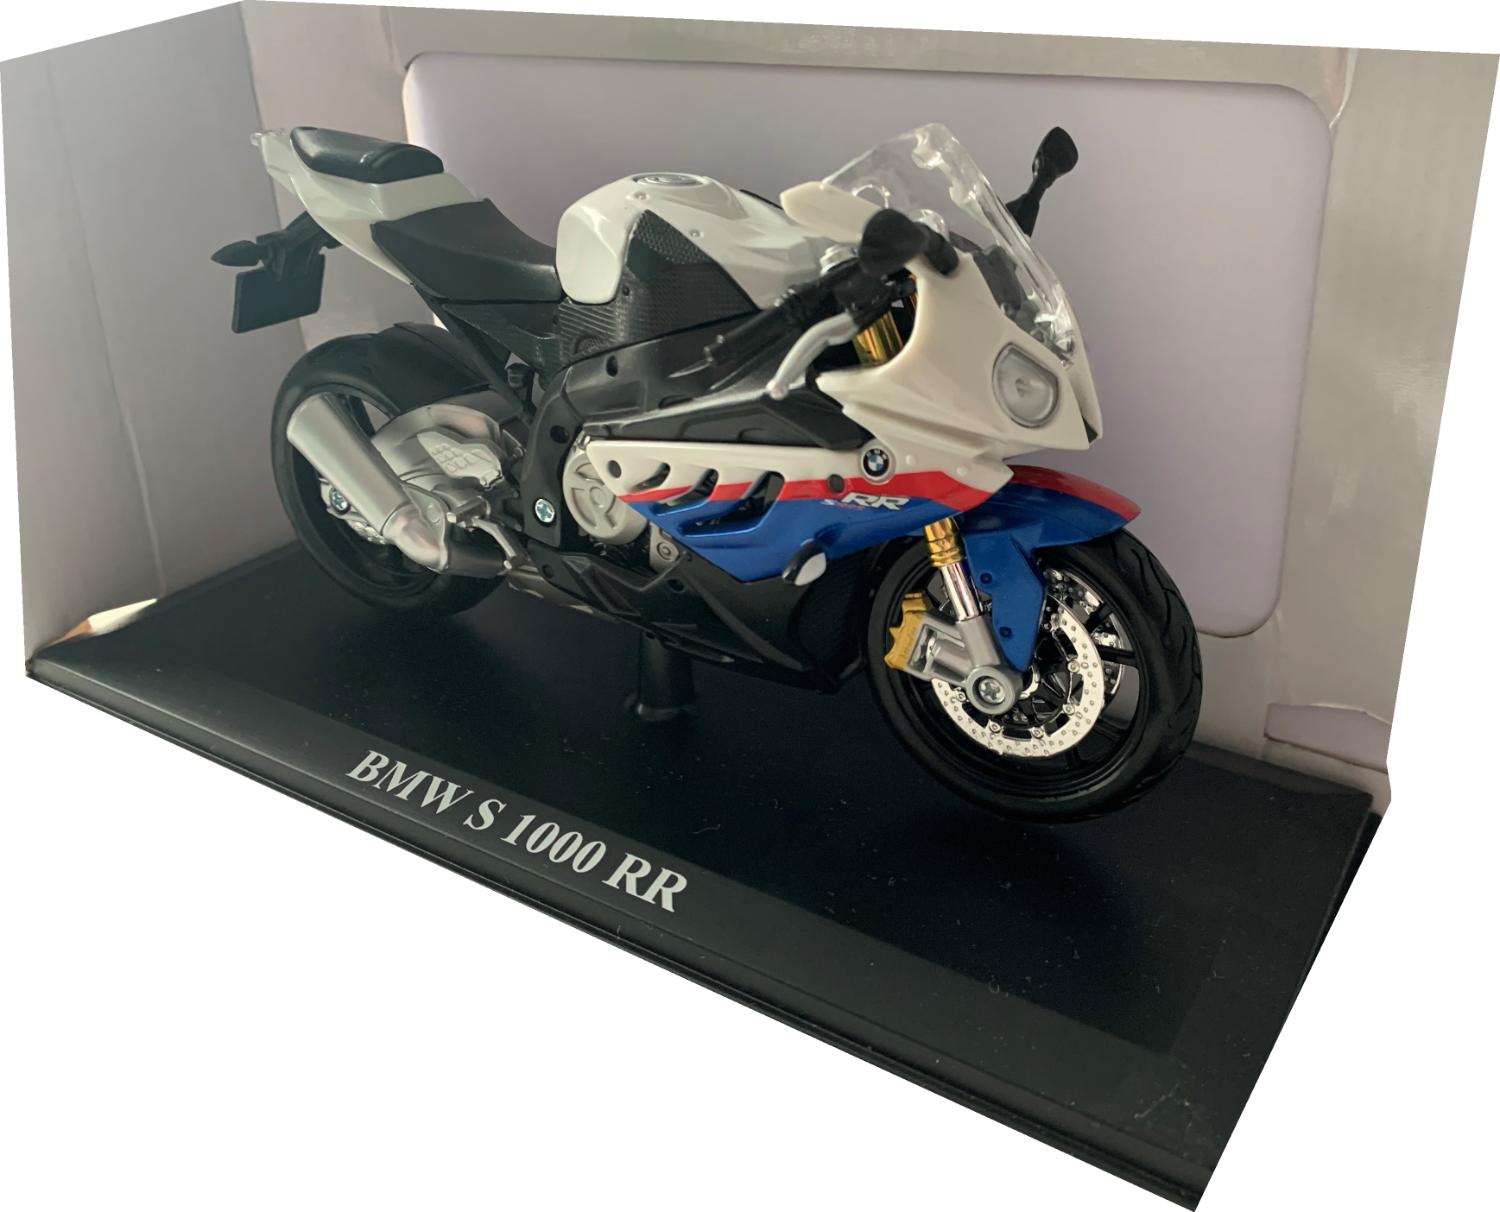 BMW S 1000 RR in white / blue / red 1:12 scale model from Maisto, mounted on  a plinth, presented in a white BMW themed box